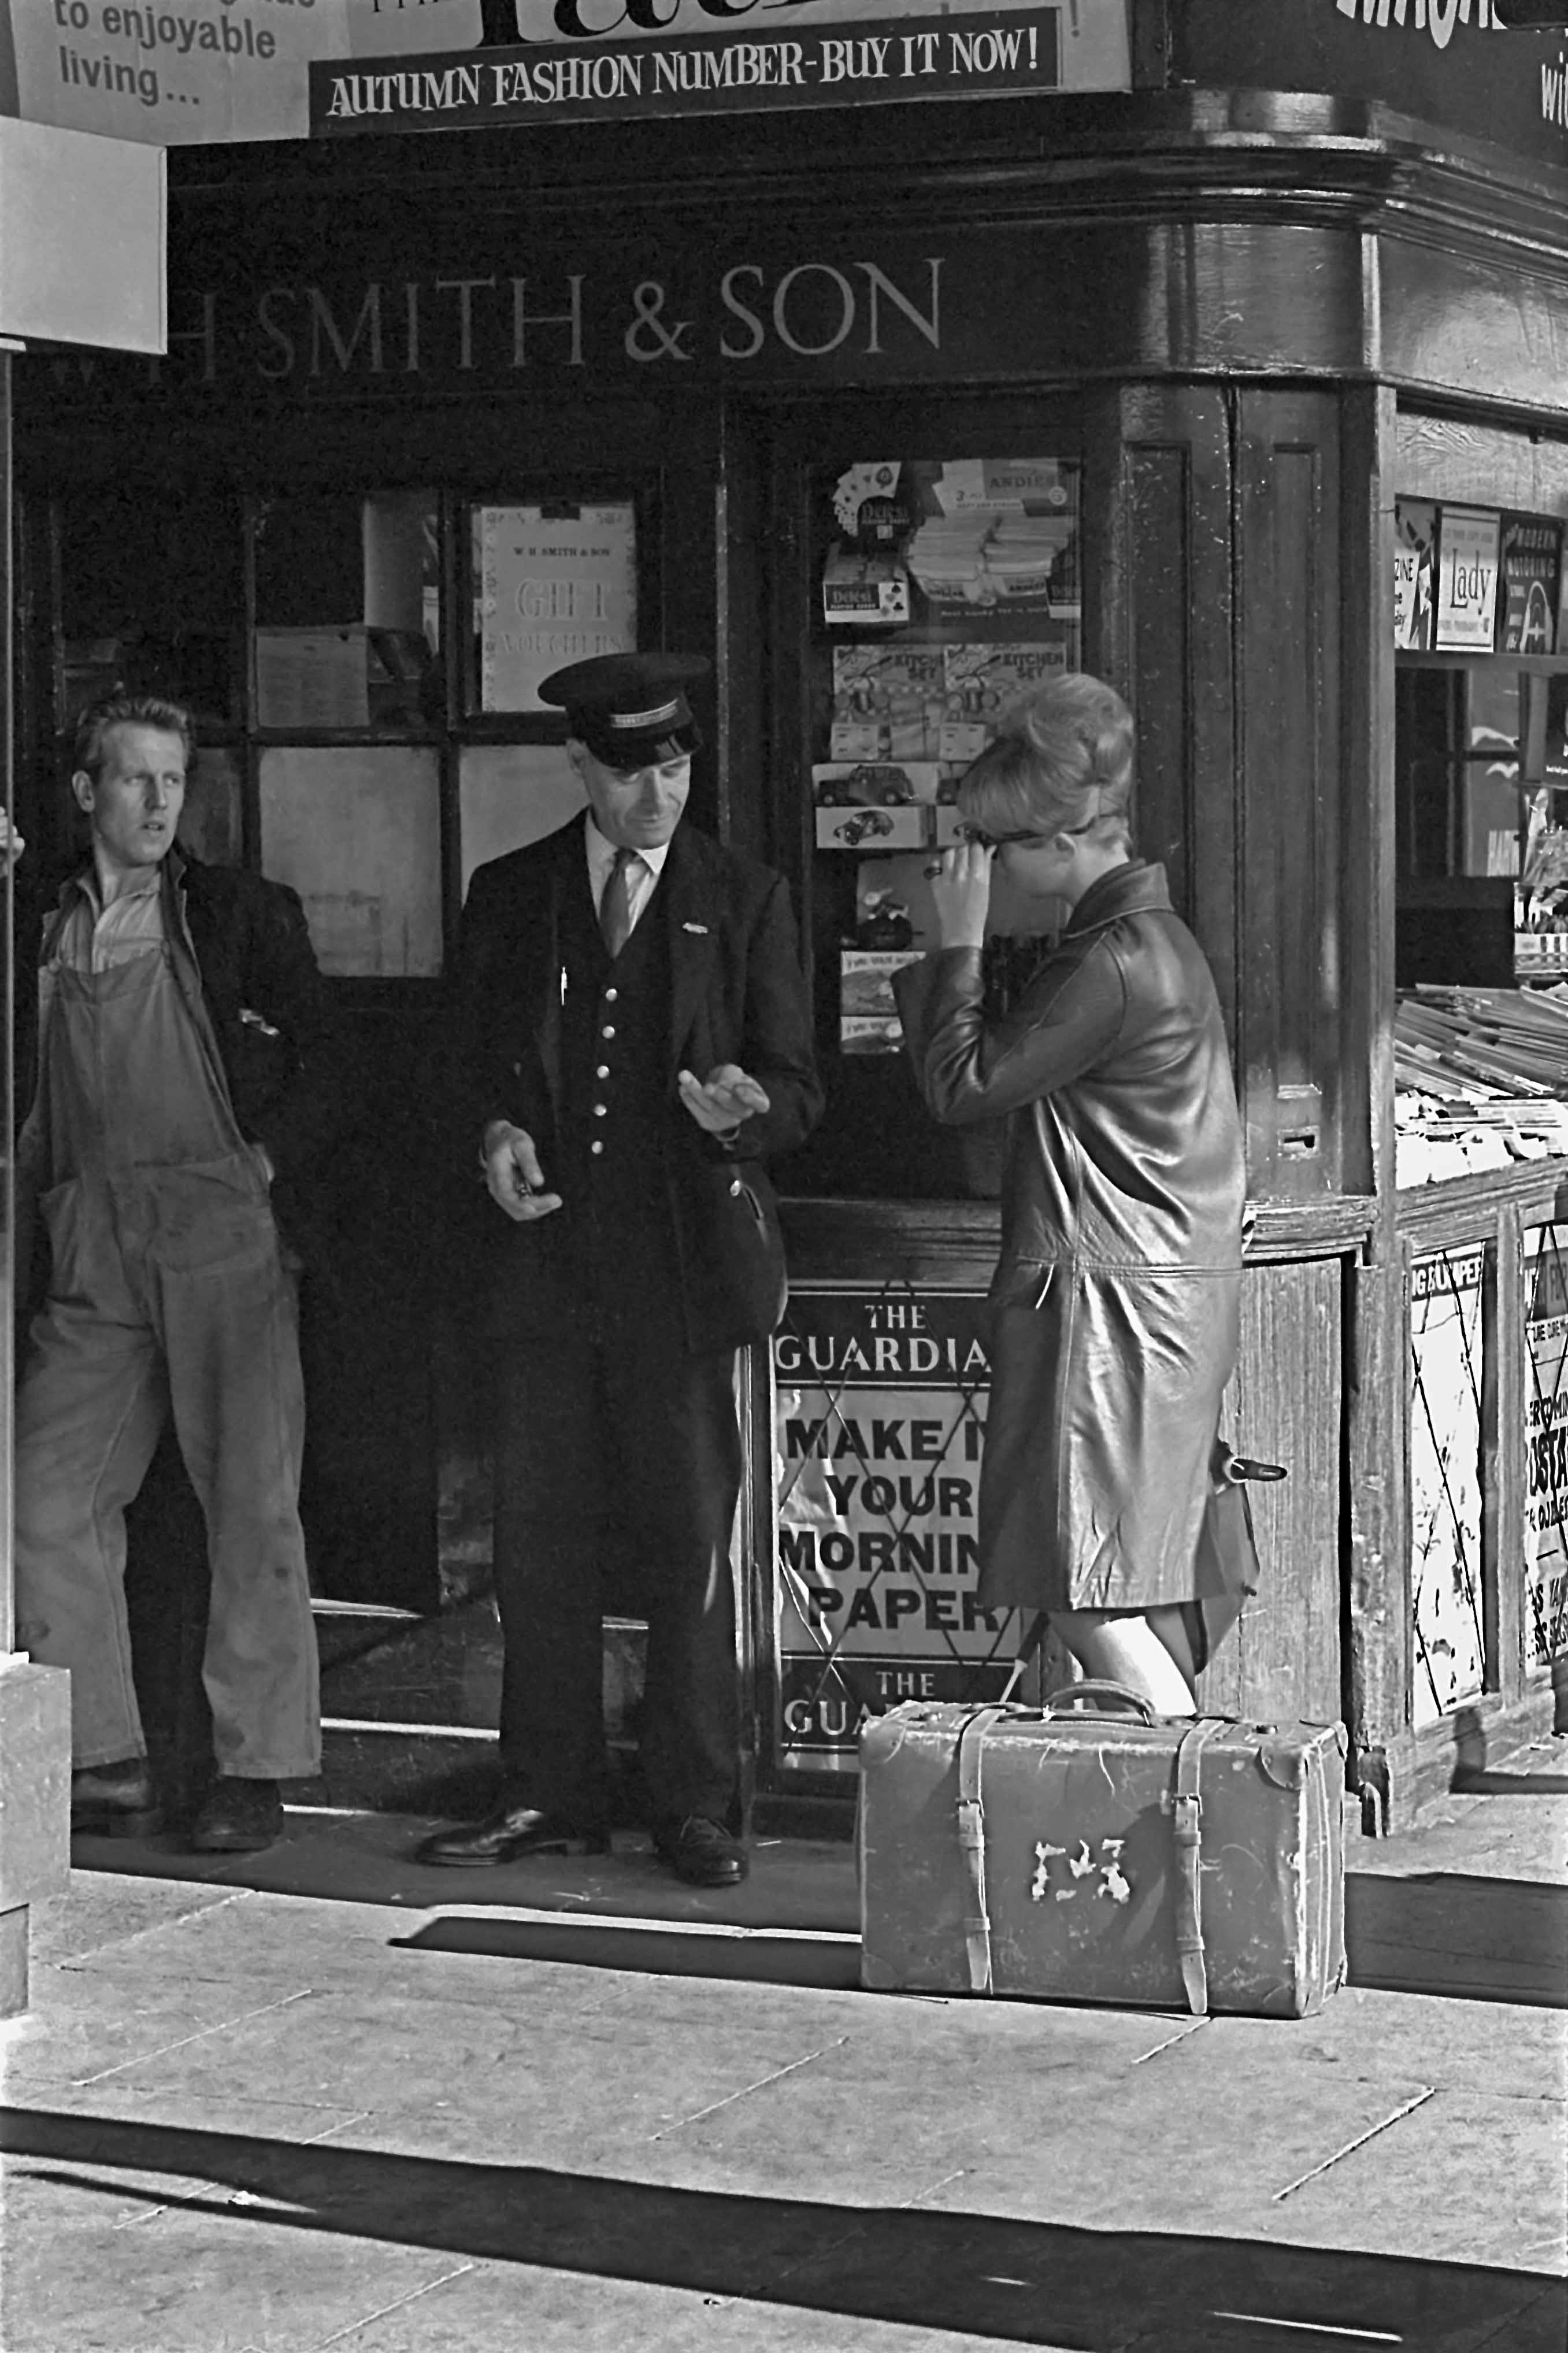 This is one of my favourite photographs. It’s a real early 1960s period piece: the young woman passenger with her stylish ‘hairdo’ yet well-worn suitcase; the ticket collector in his traditional railway staff uniform with waistcoat, shiny metal buttons and peaked cap; the young railwayman in bib-and-brace overalls with pop-star influenced quiff hairstyle idling away a few minutes looking on. George Fielding, a cleaner and fireman at Grantham loco from 17th Jan 1955 until 17th Jan 1964, recognised his friend Alan Grummitt as the young man. Alan was also a cleaner and fireman at Grantham from about 1955 until late in 1963. 19th September 1963 Photograph by Cedric A. Clayson, © John Clayson 